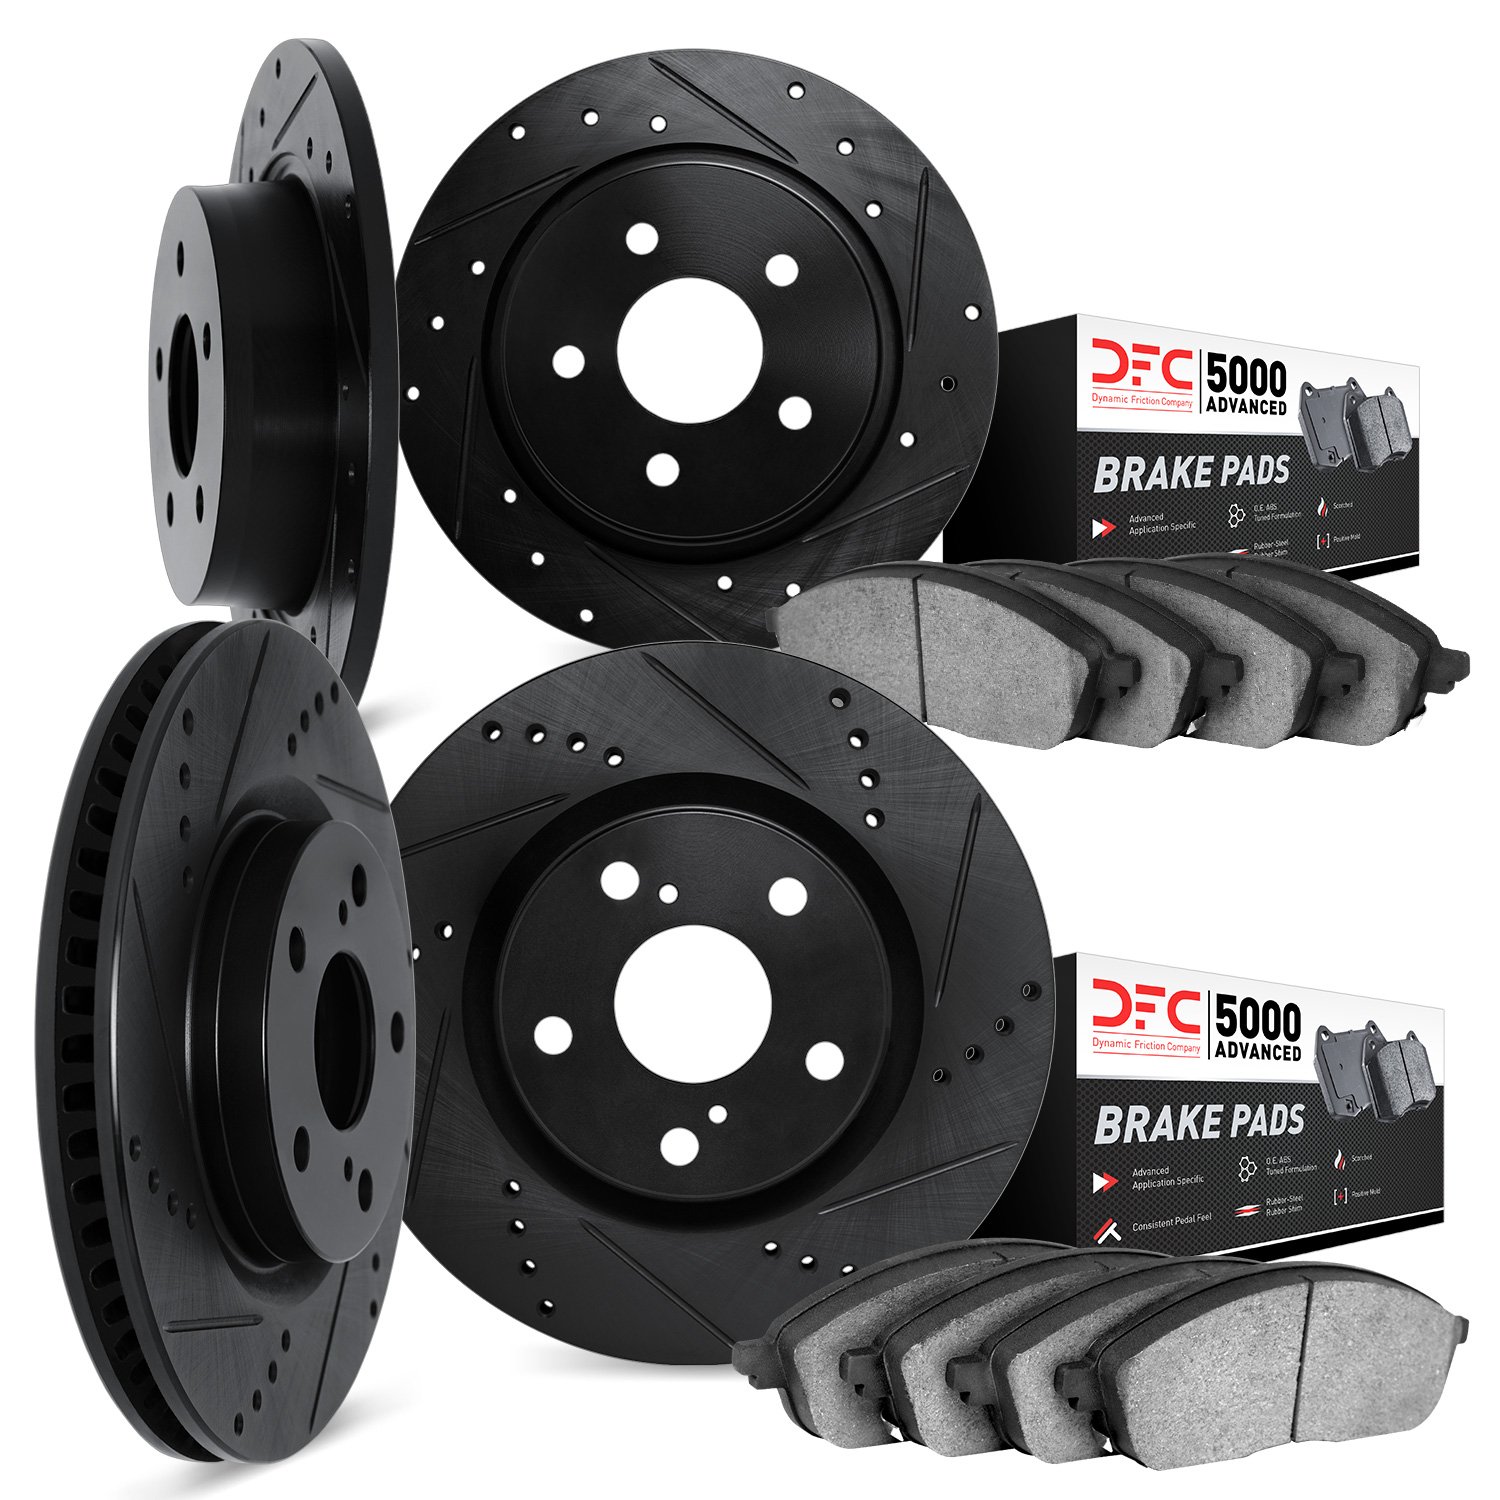 8504-75005 Drilled/Slotted Brake Rotors w/5000 Advanced Brake Pads Kit [Black], 2014-2015 Lexus/Toyota/Scion, Position: Front an